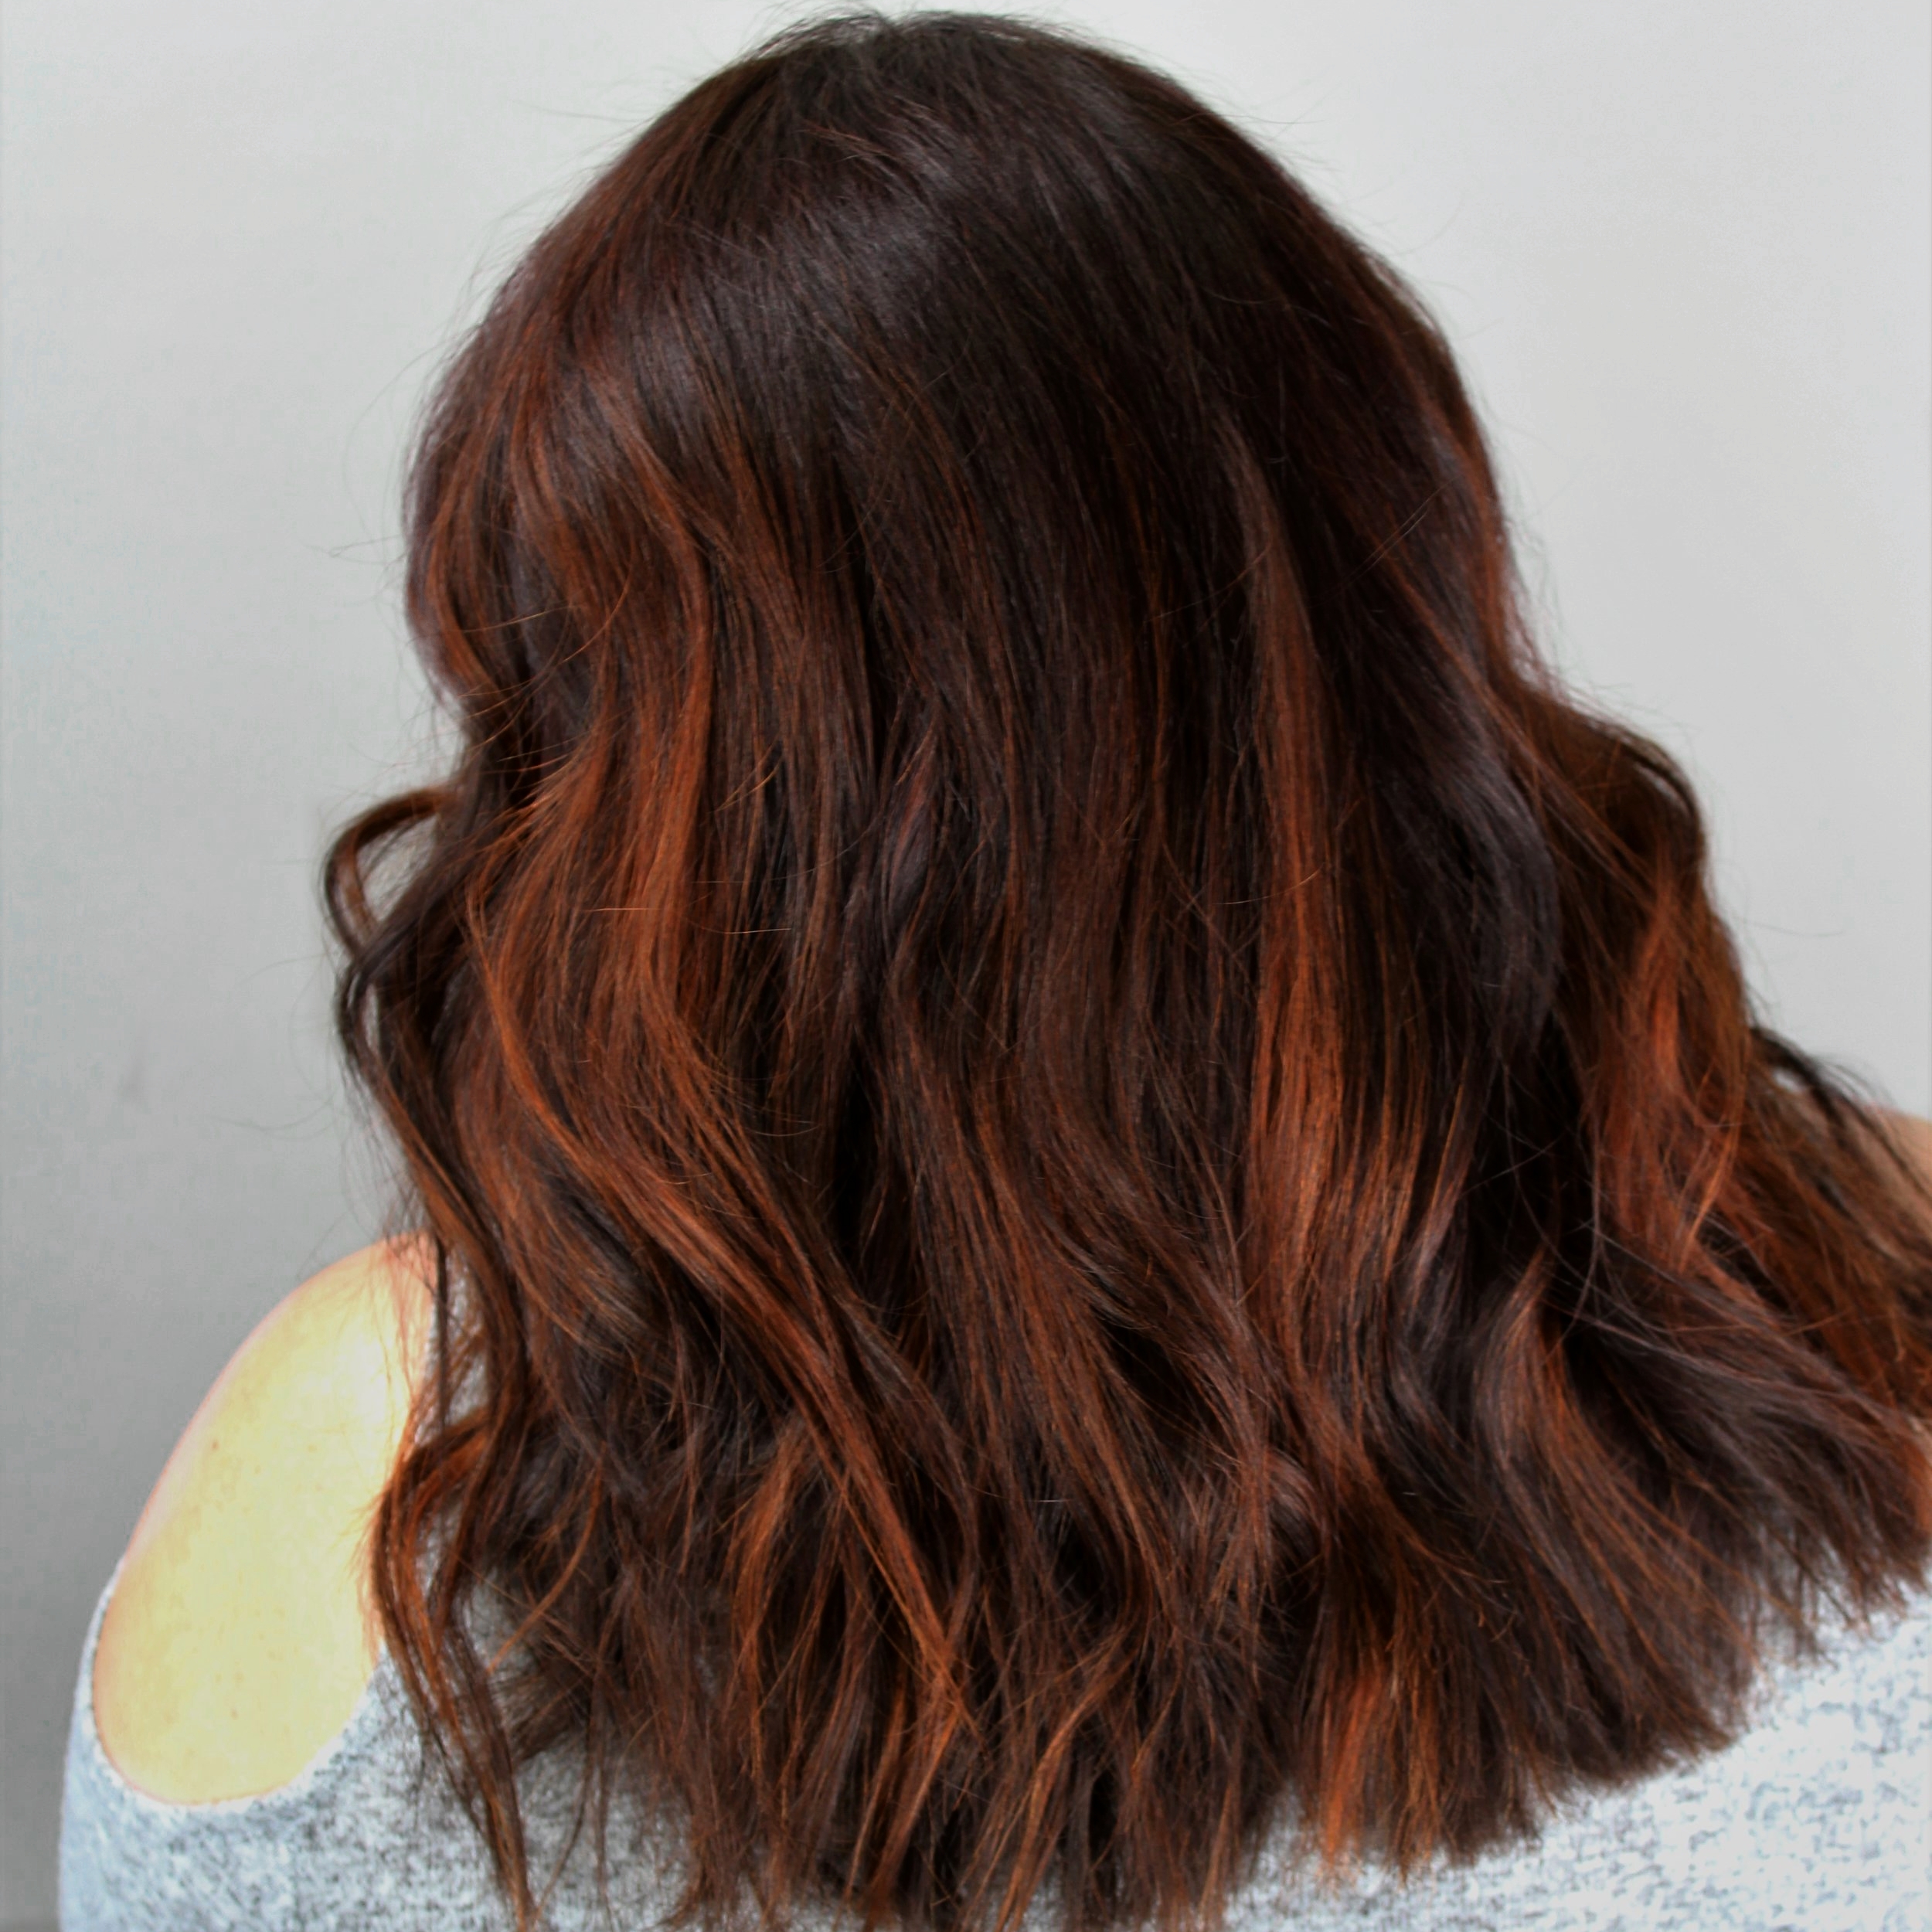 3 Simple Ways to Reboot Your Hair for Fall — Amaryllis